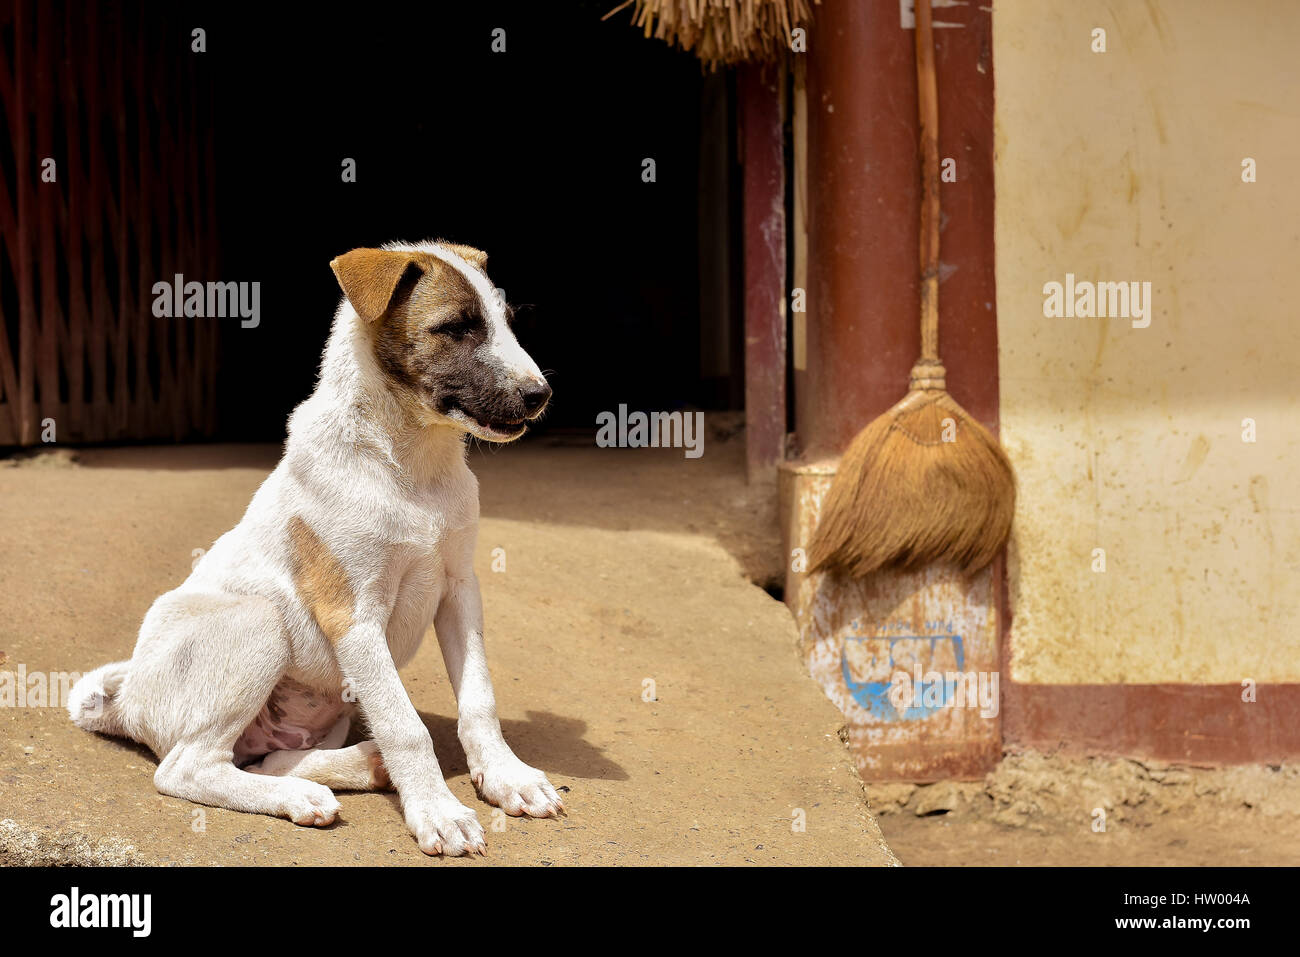 Young cute puppy dog  sat on concrete pathway to door outside on a sunny day. Stock Photo